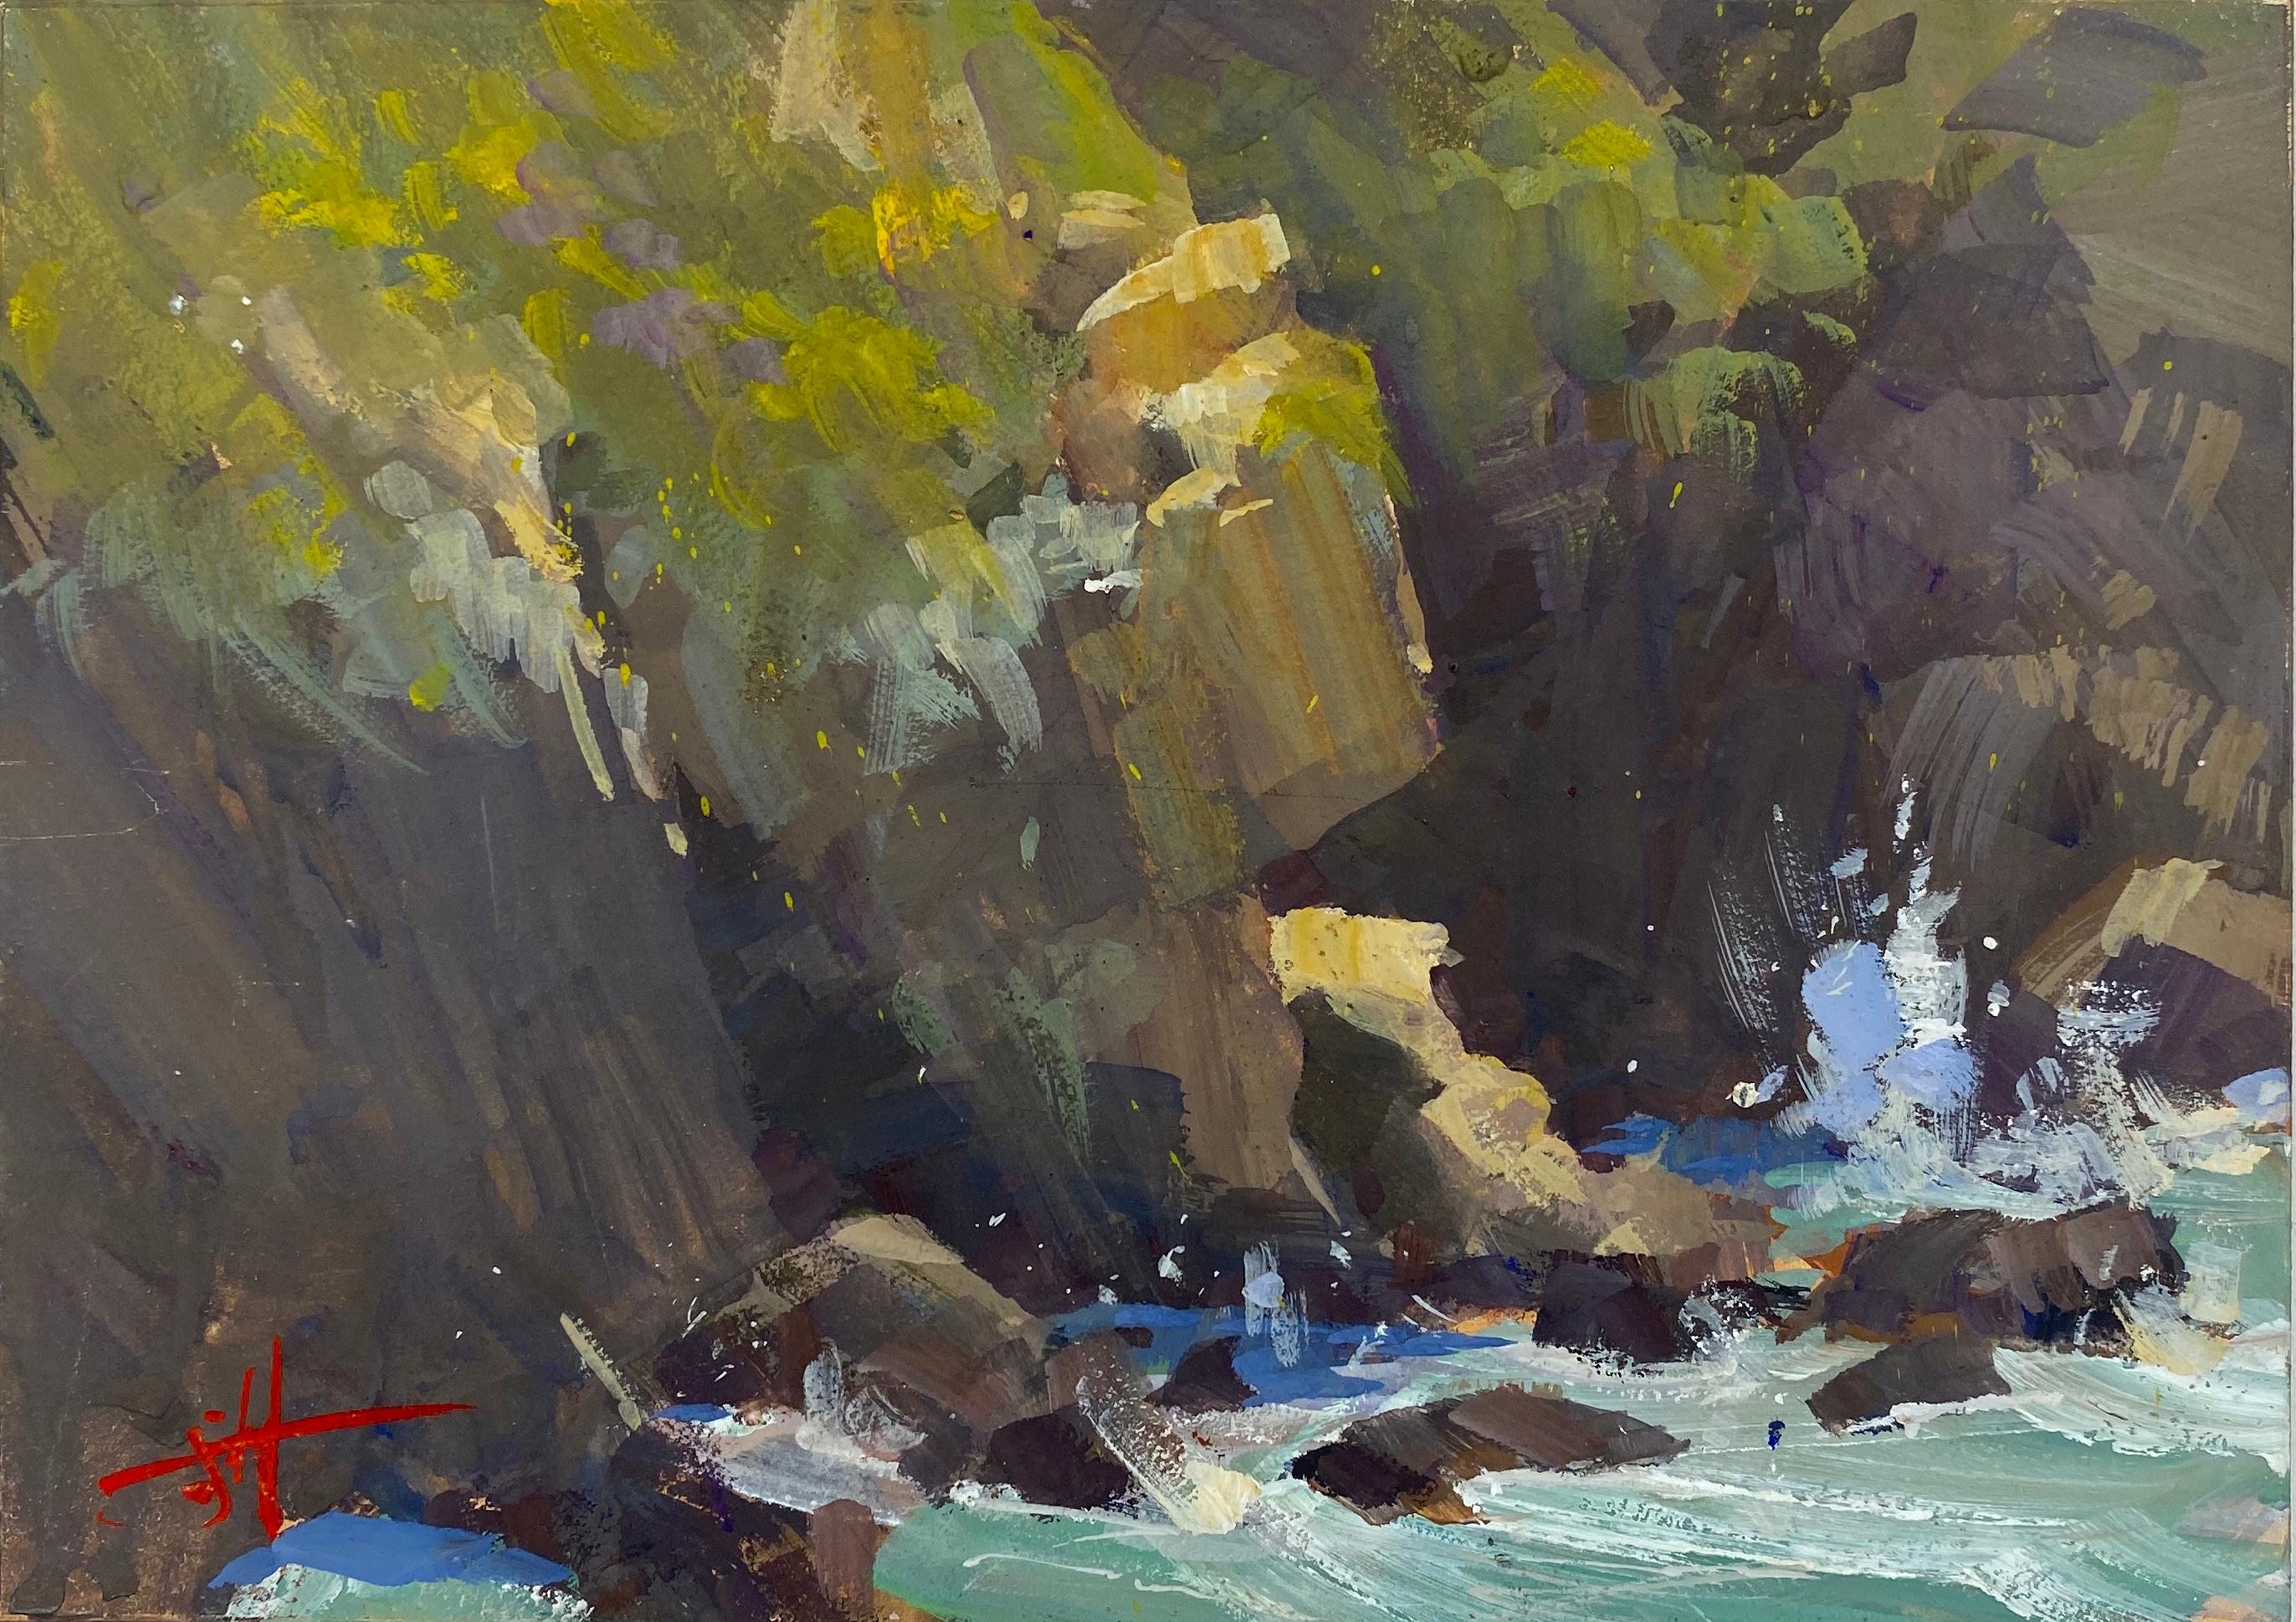 Judd Mercer Landscape Painting - "Cliff Dwelling" Gouache Painting